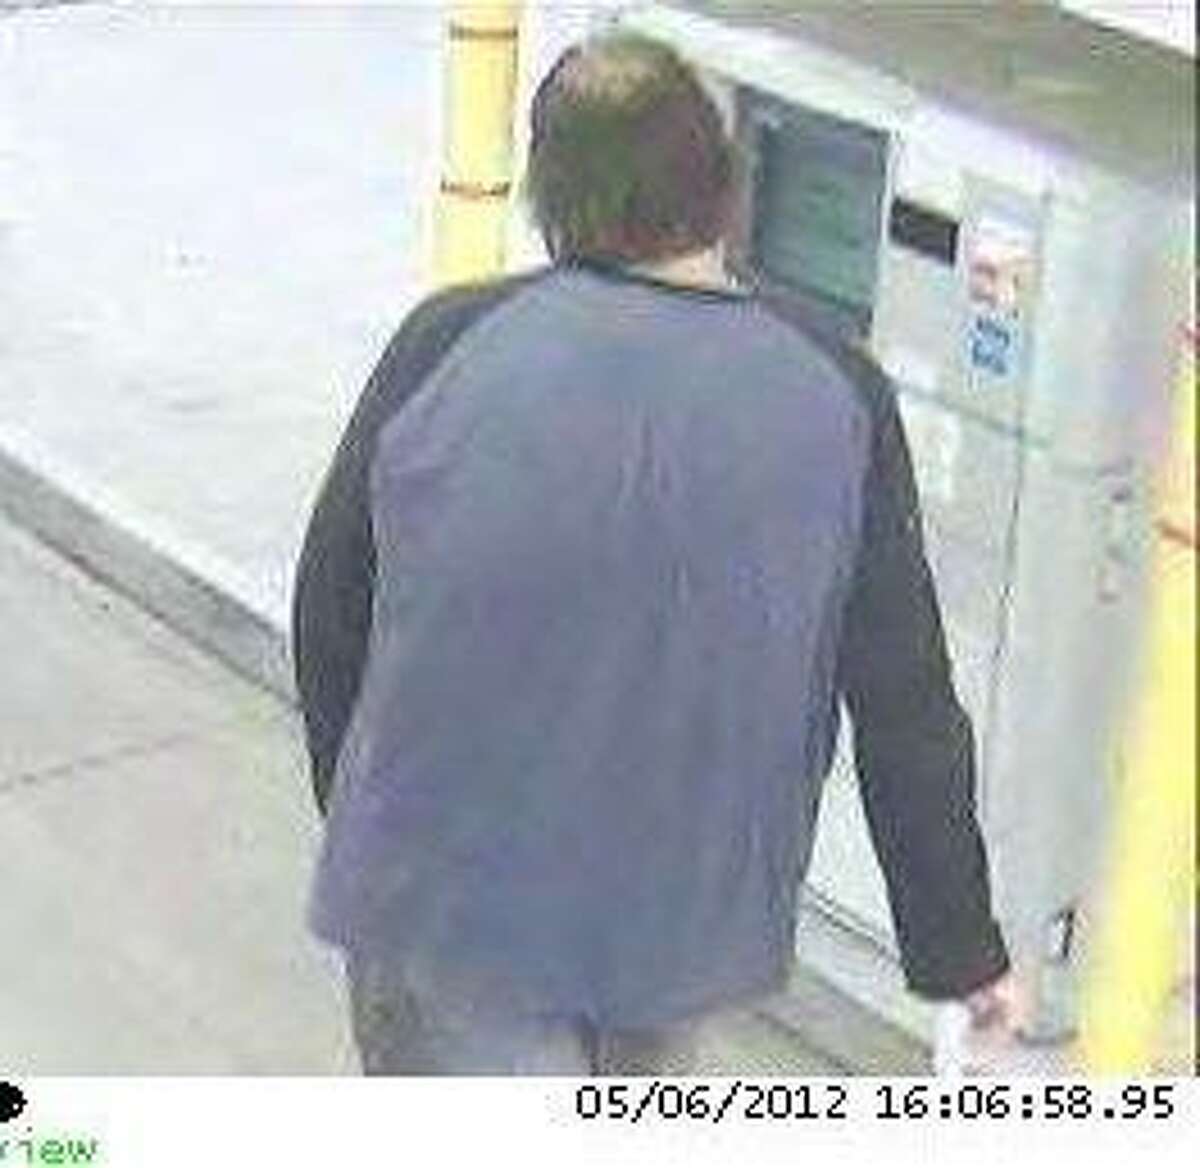 A rear shot of the suspect with the heavier build.